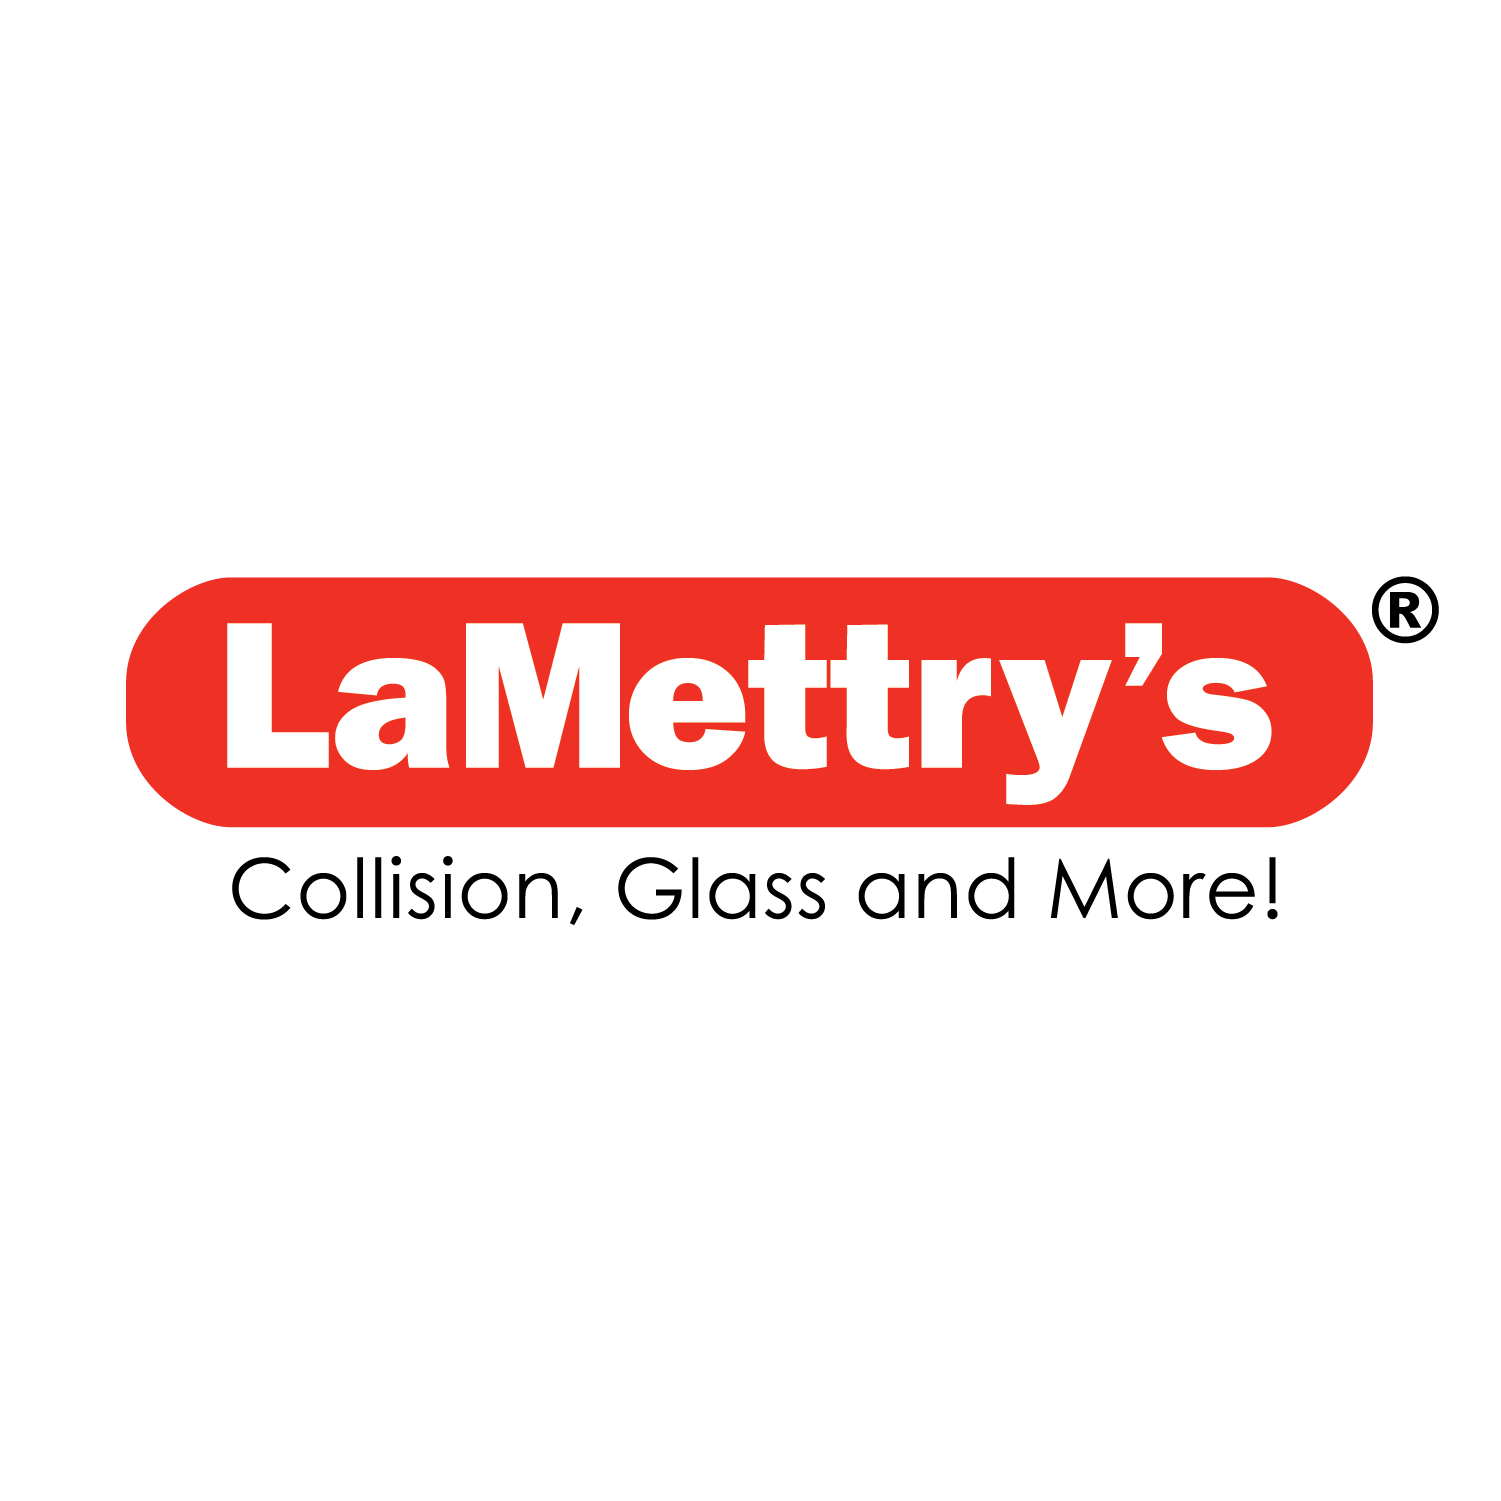 LaMettry’s Collision